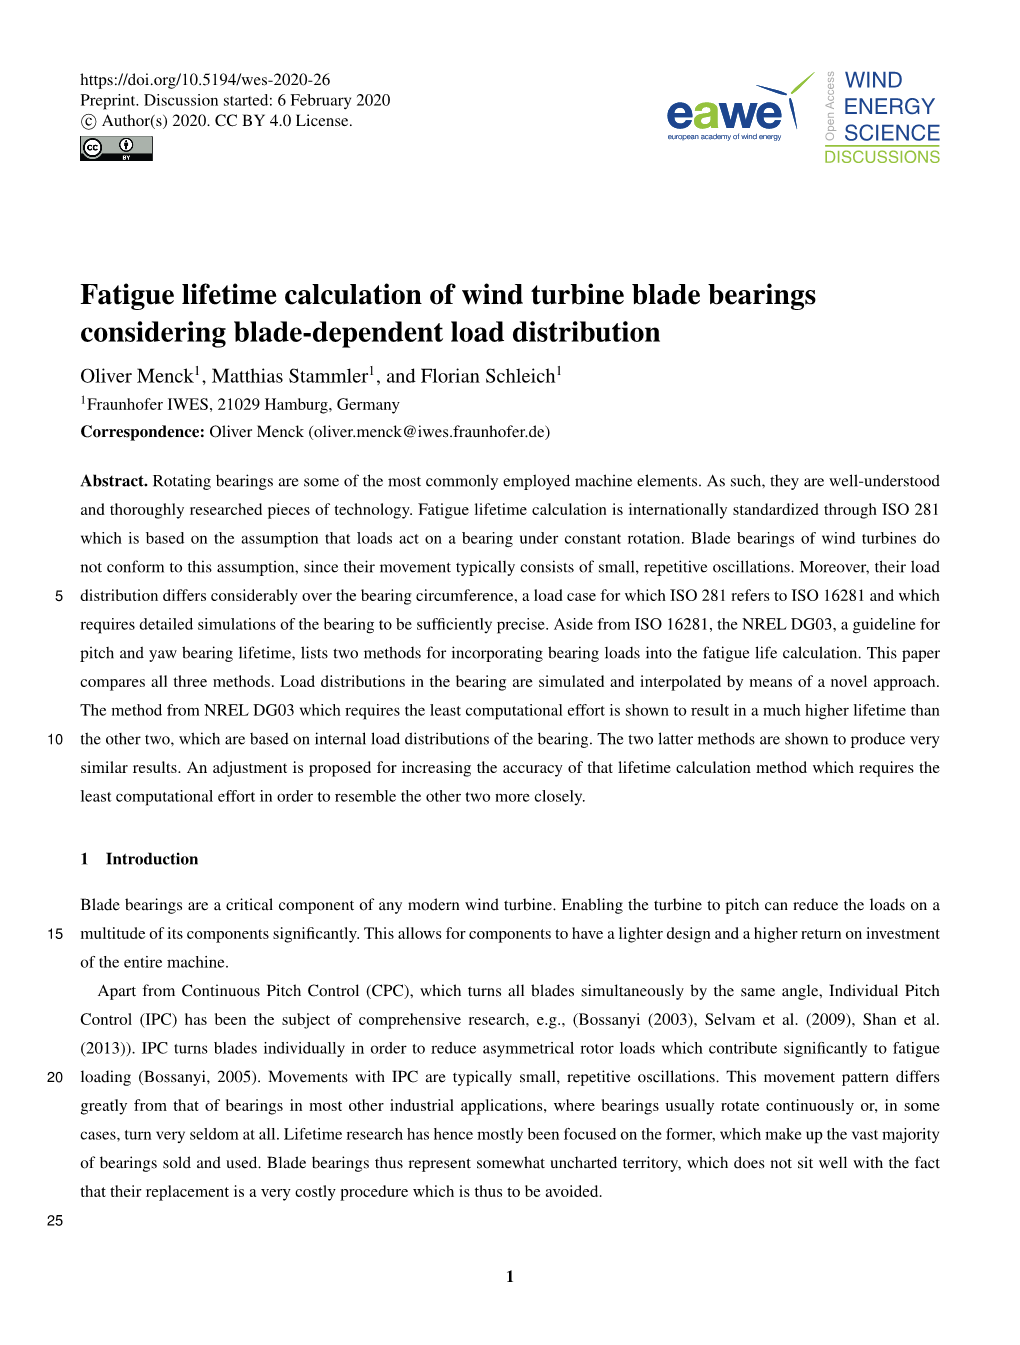 Fatigue Lifetime Calculation of Wind Turbine Blade Bearings Considering Blade-Dependent Load Distribution